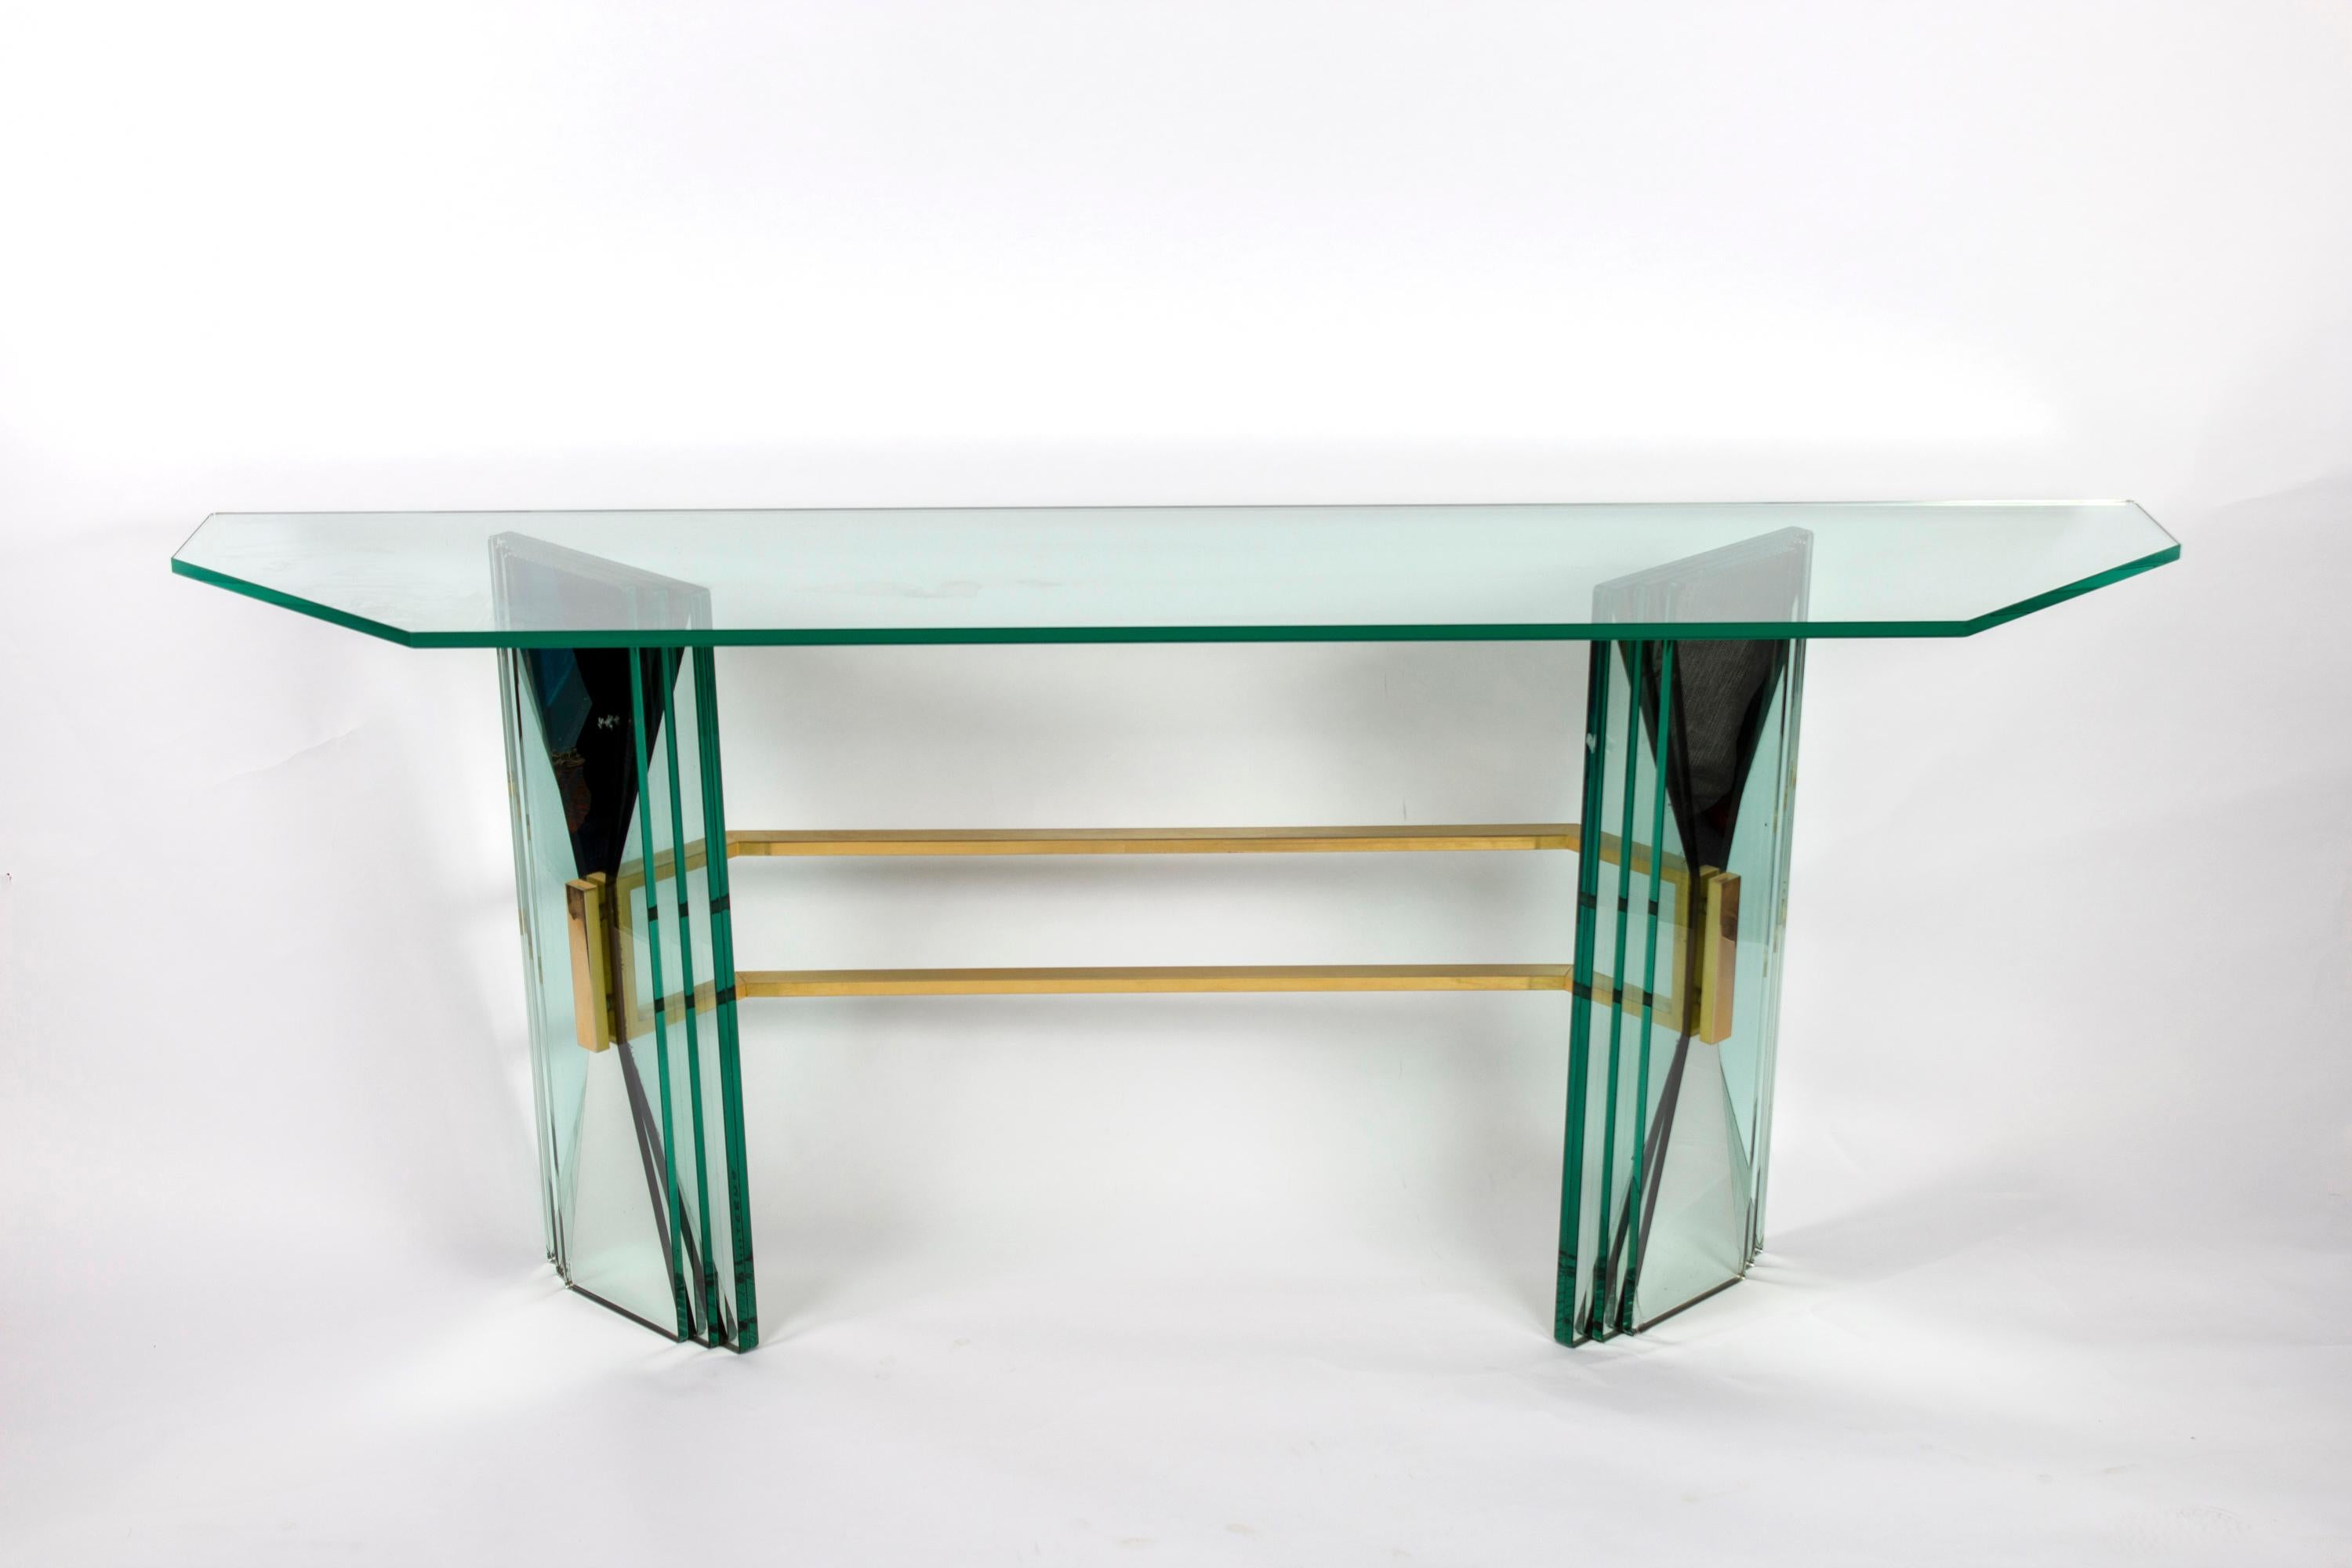 Italy, 1950s.
This outstanding console table is made with thick green Nile glass, a typical feature of Fontana Arte's pieces.
Elegant design geometric legs with a mirrored glass insert wit brass support .
Excellent original vintage condition.

